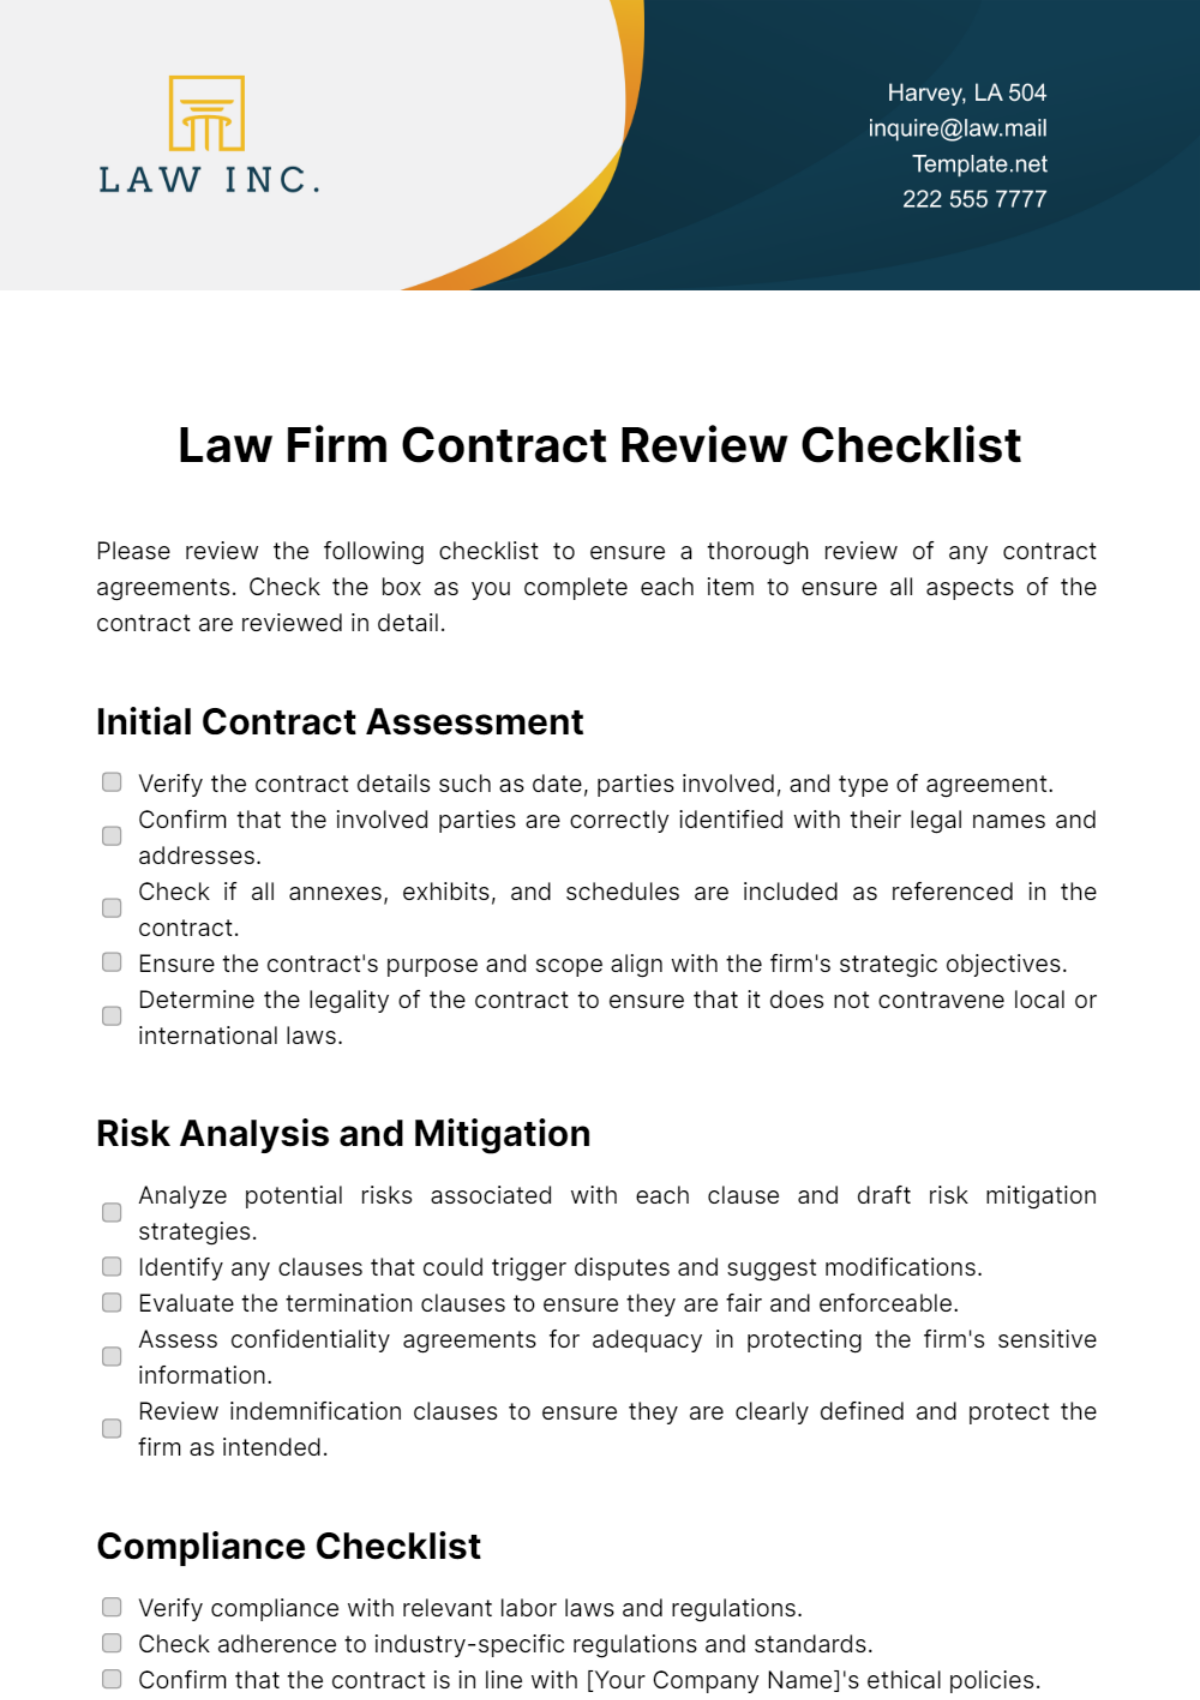 Law Firm Contract Review Checklist Template